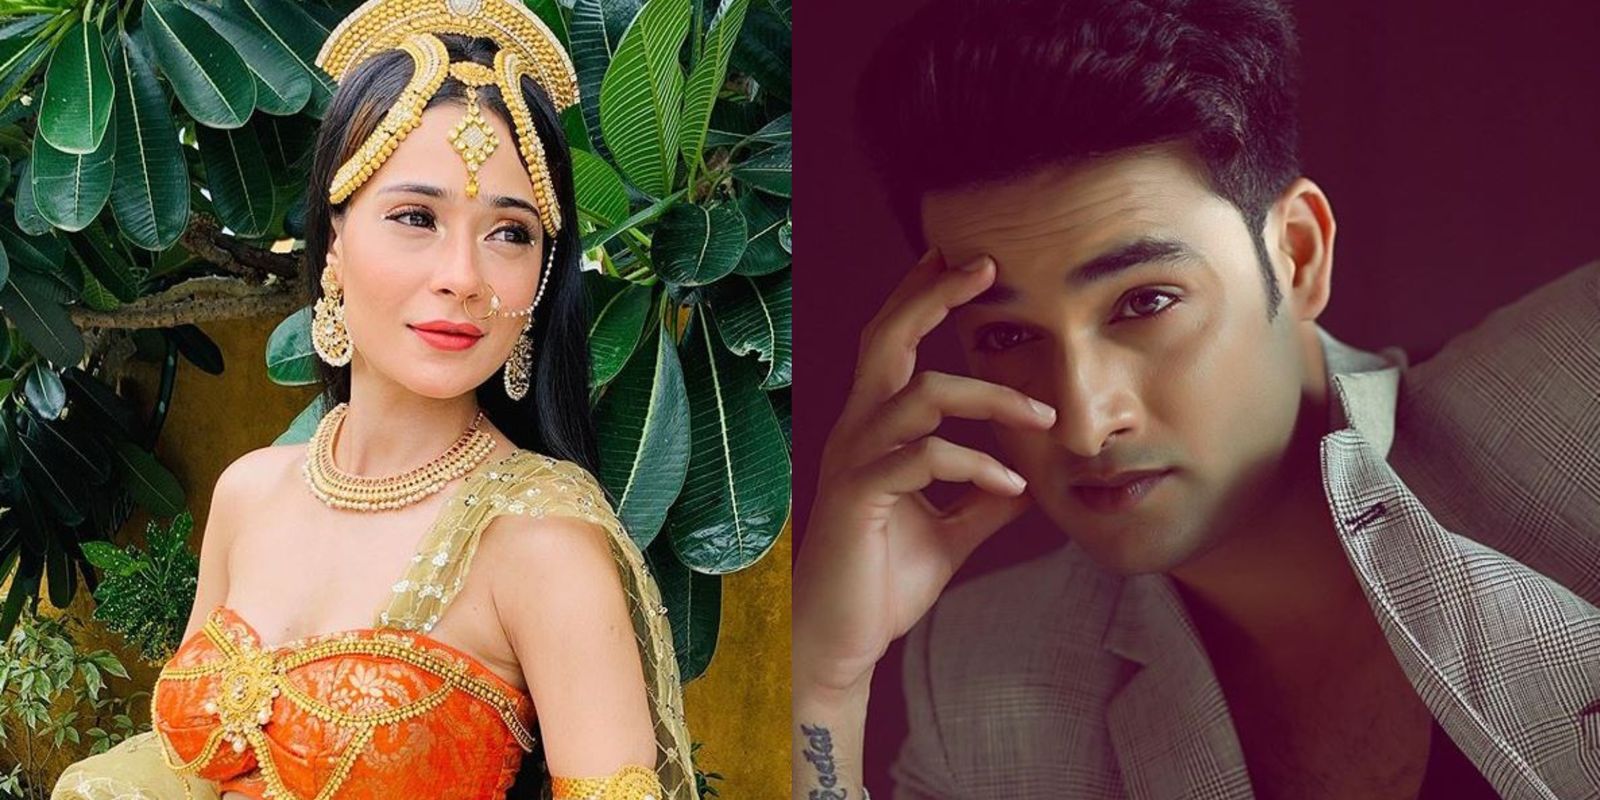 TV Stars Sara Khan And Himanshu Soni Test Positive For COVID-19, Both Are Under Home Quarantine